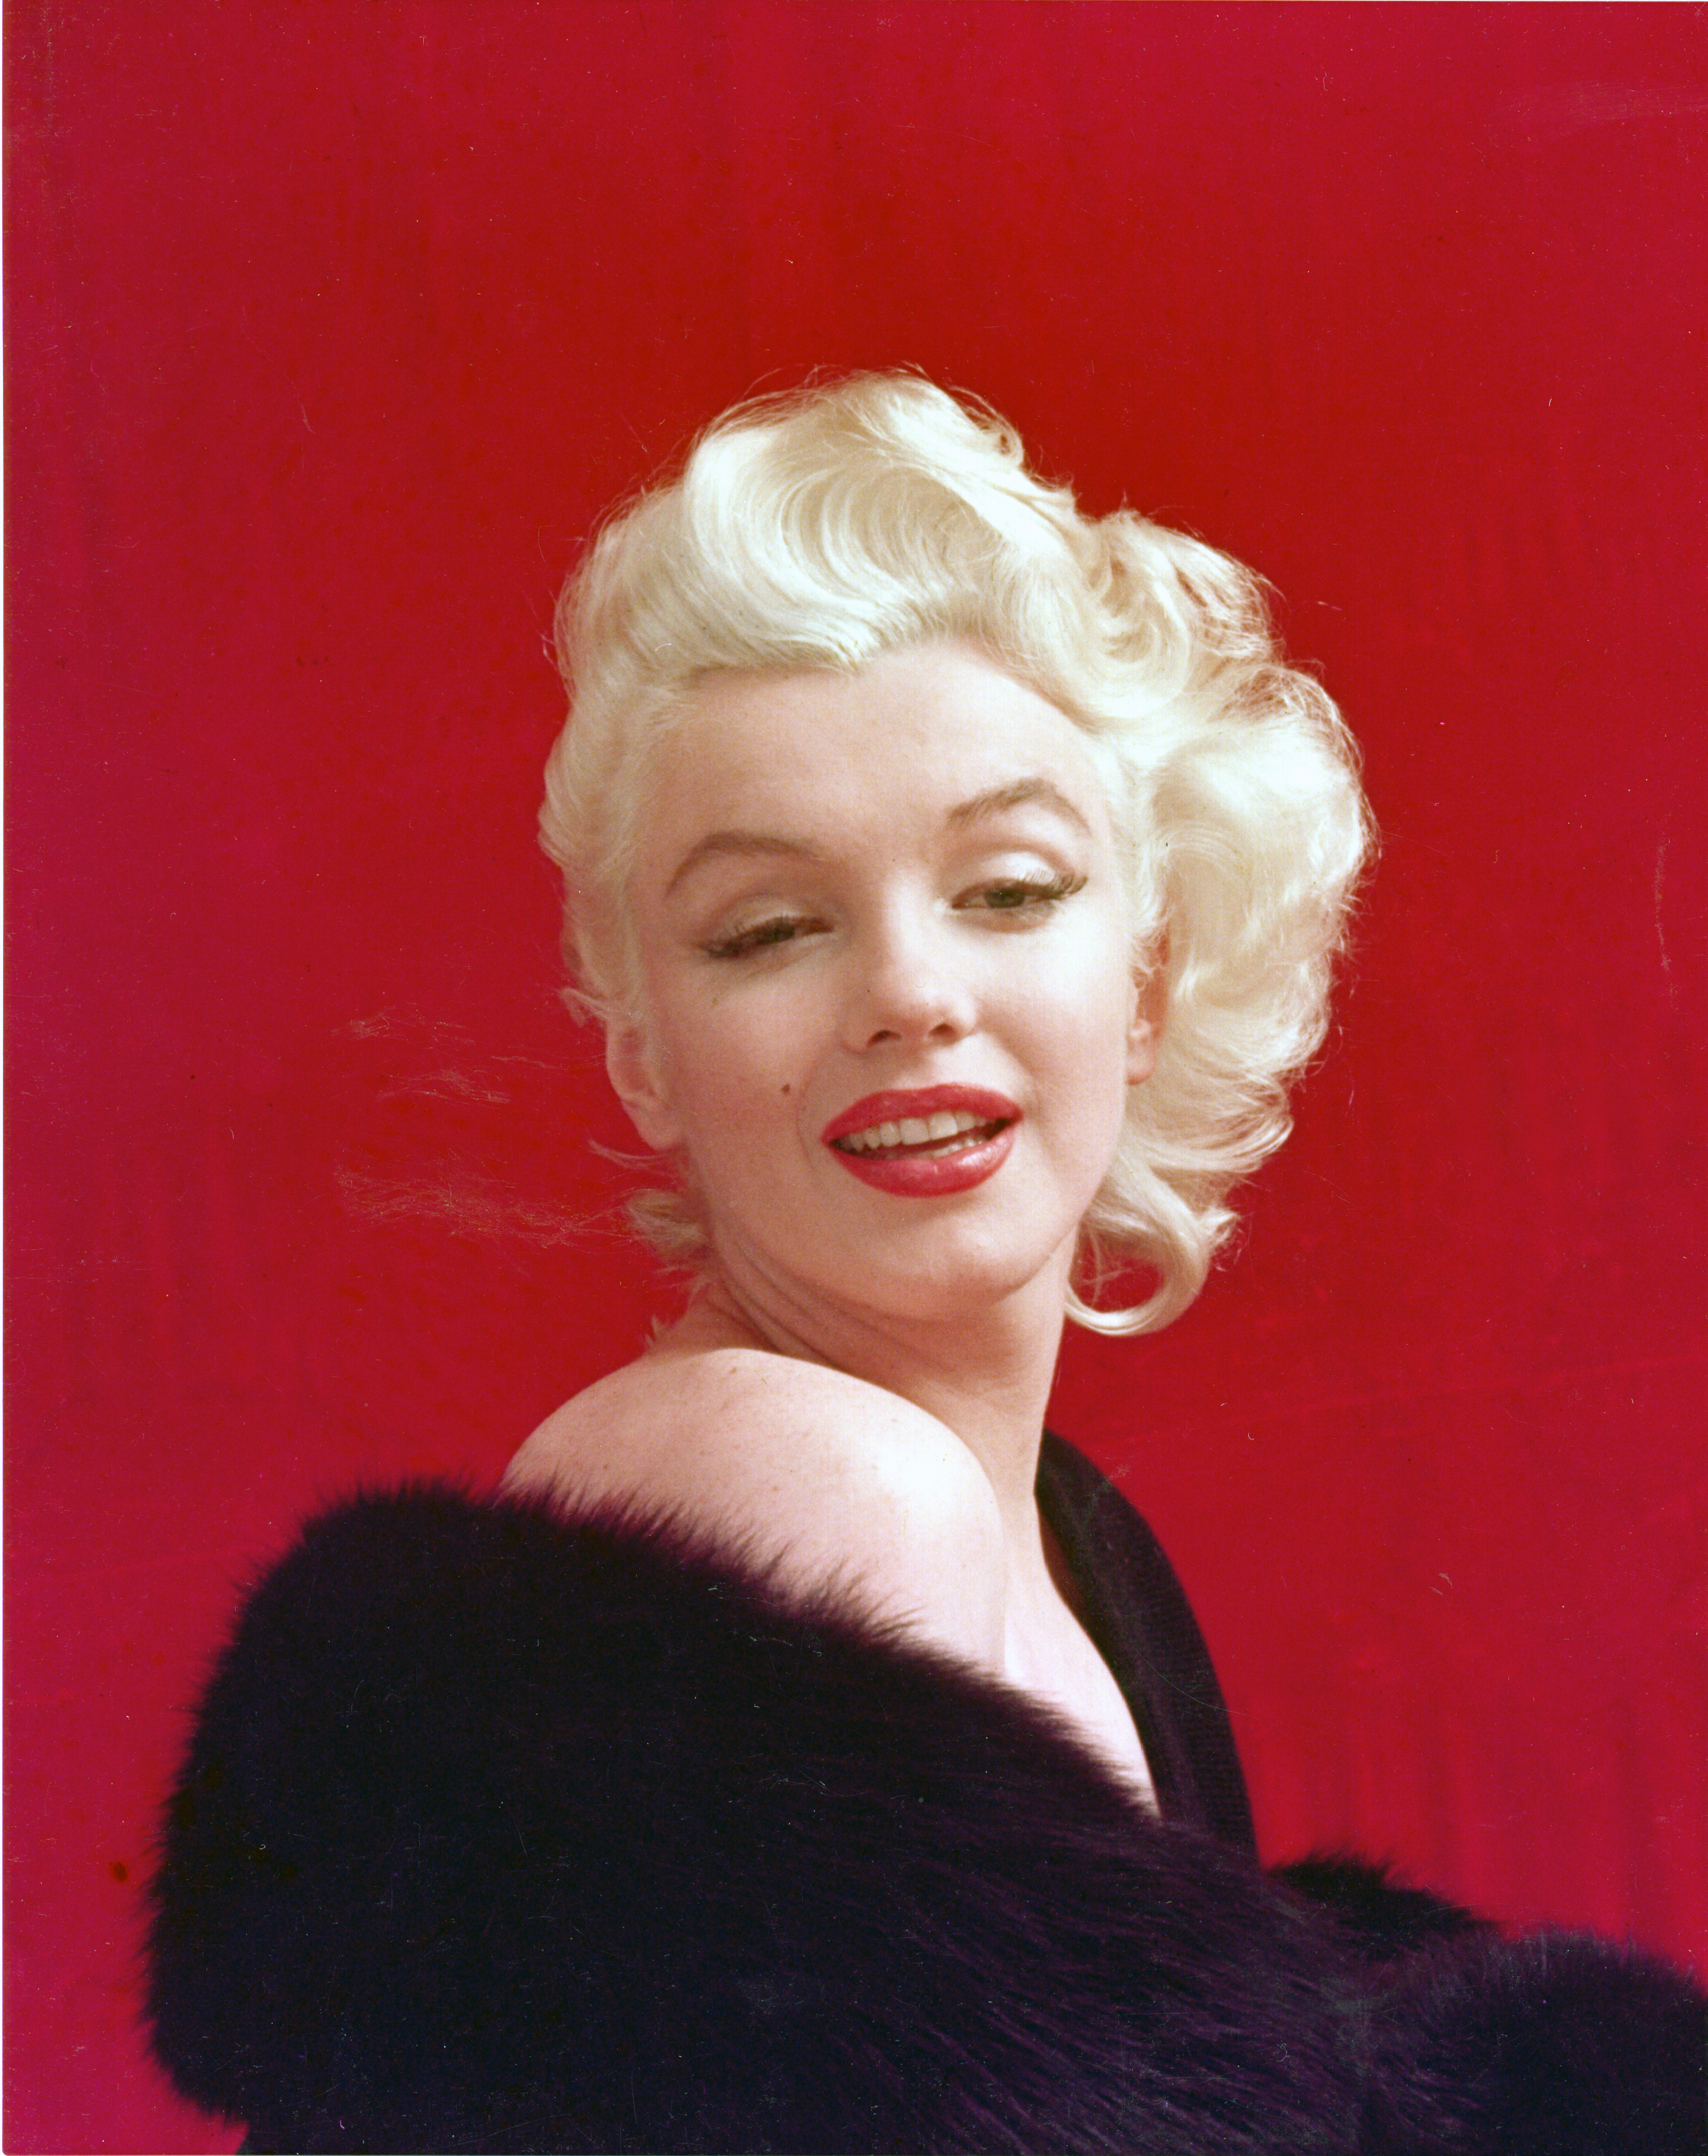 Marilyn Monroe poses for a portrait circa 1953 | Source: Getty Images